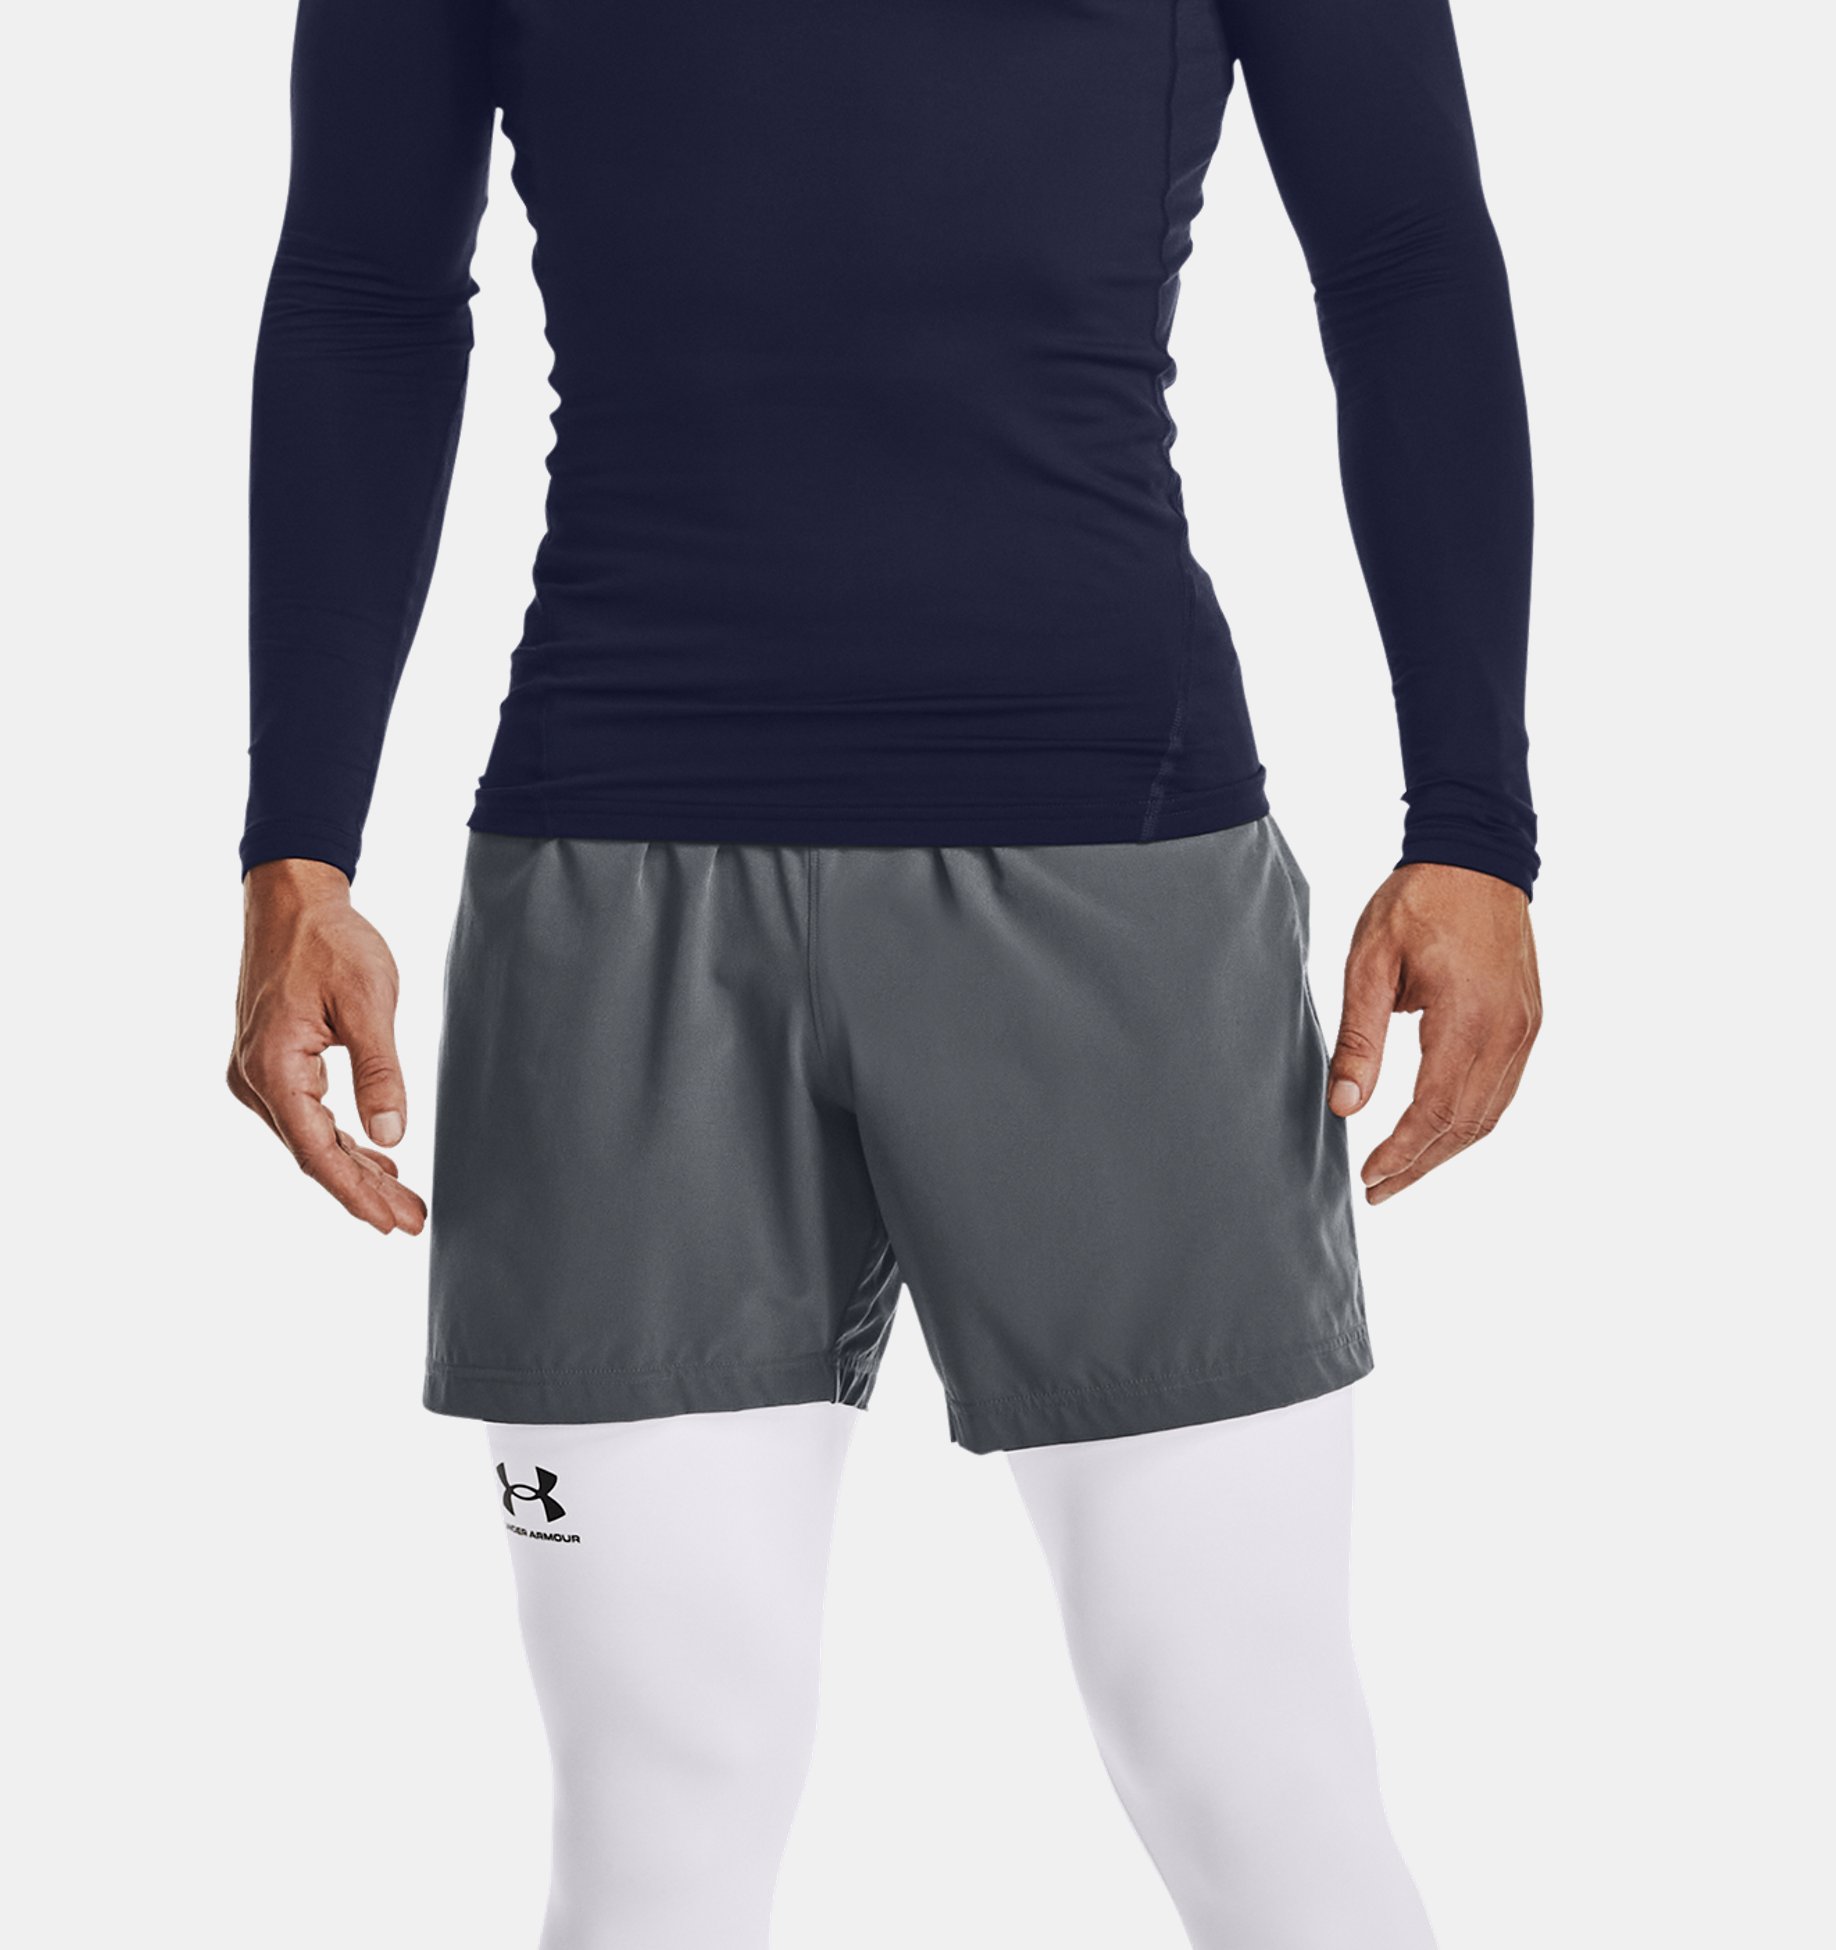  Under Armour Men's ColdGear Armour Fitted Mock, (767